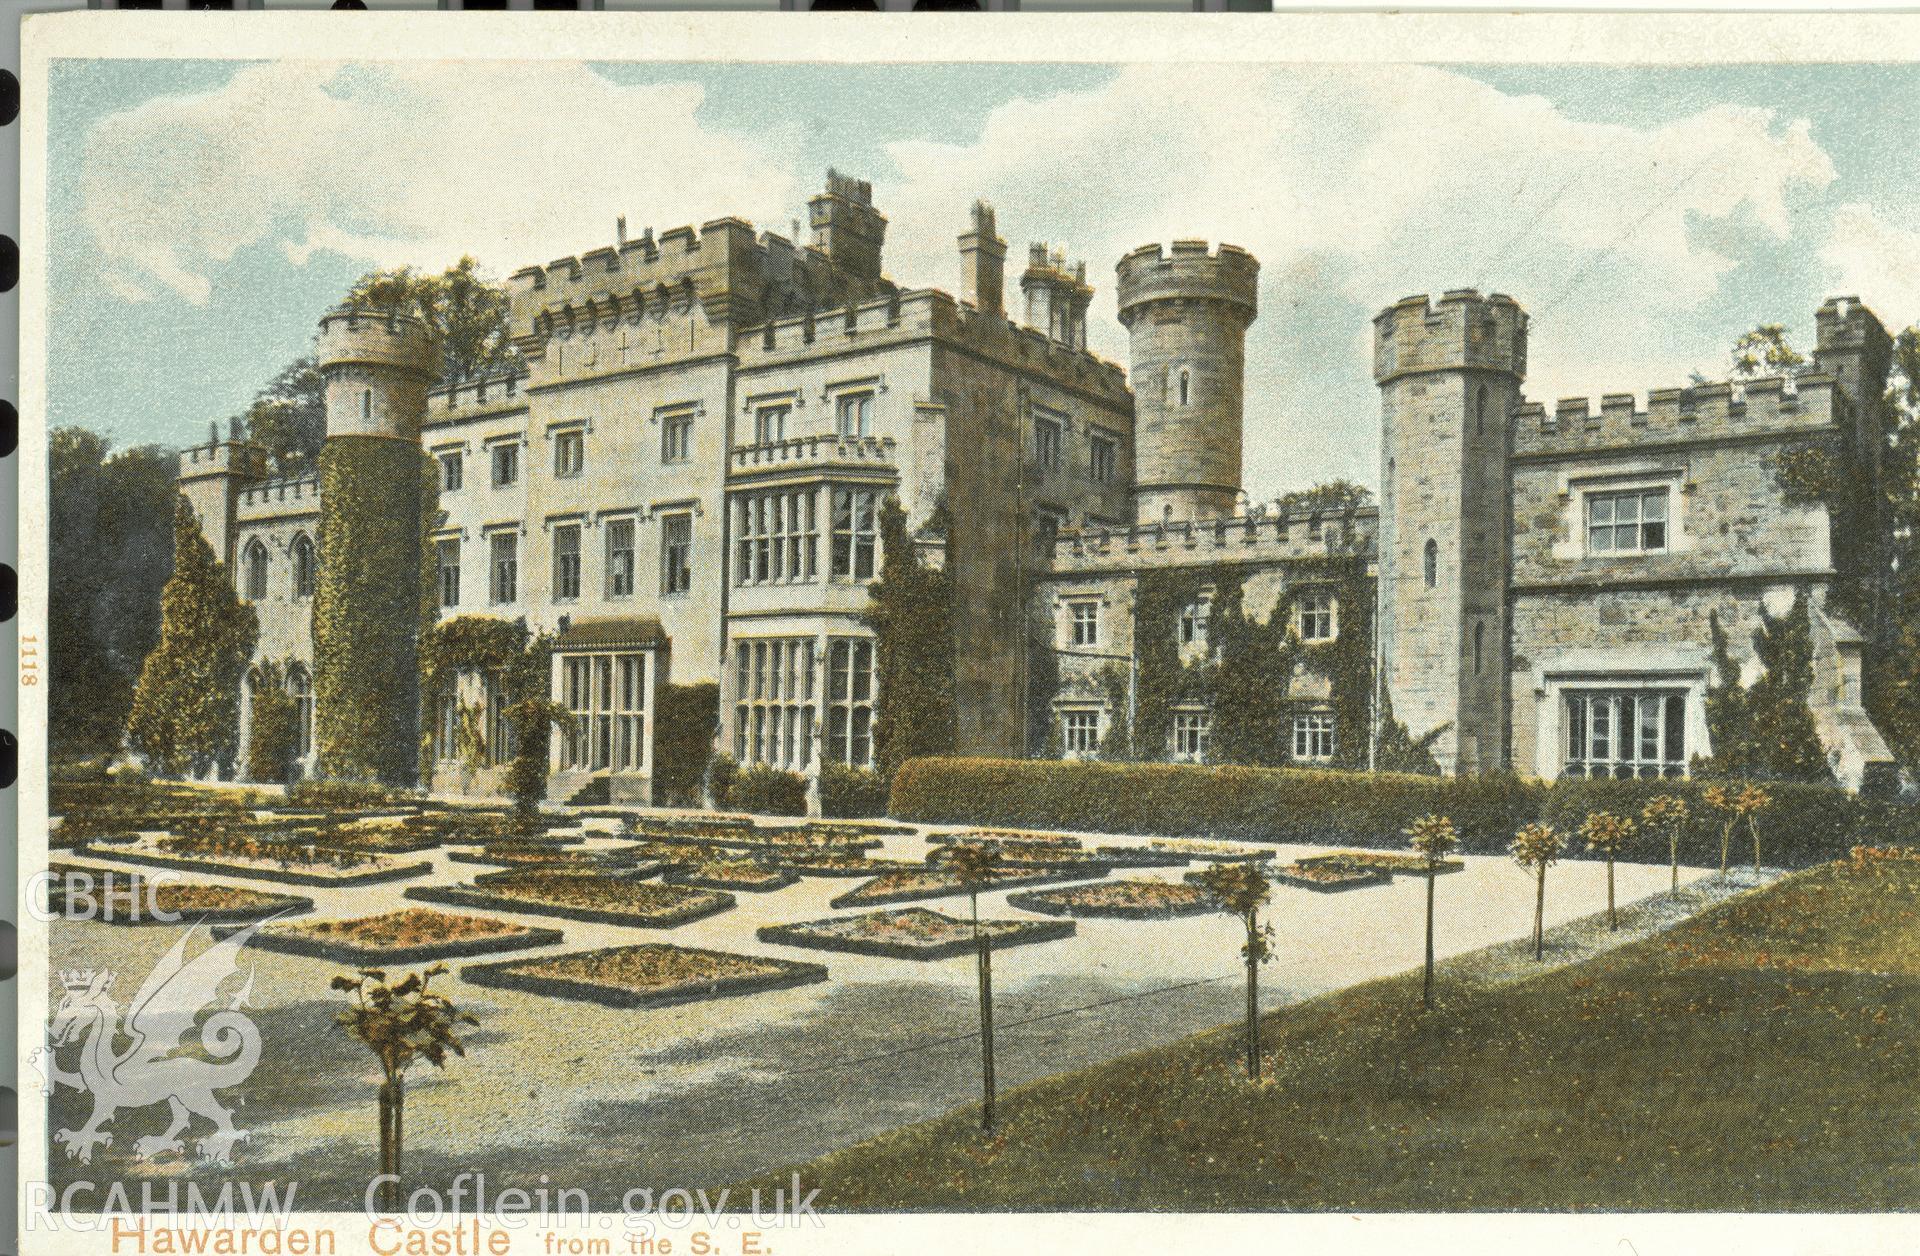 Digitised postcard image of Hawarden Castle, Peacock Brand "Autochrom" Pictorial sationery Co. Ltd., London. Produced by Parks and Gardens Data Services, from an original item in the Peter Davis Collection at Parks and Gardens UK. We hold only web-resolution images of this collection, suitable for viewing on screen and for research purposes only. We do not hold the original images, or publication quality scans.